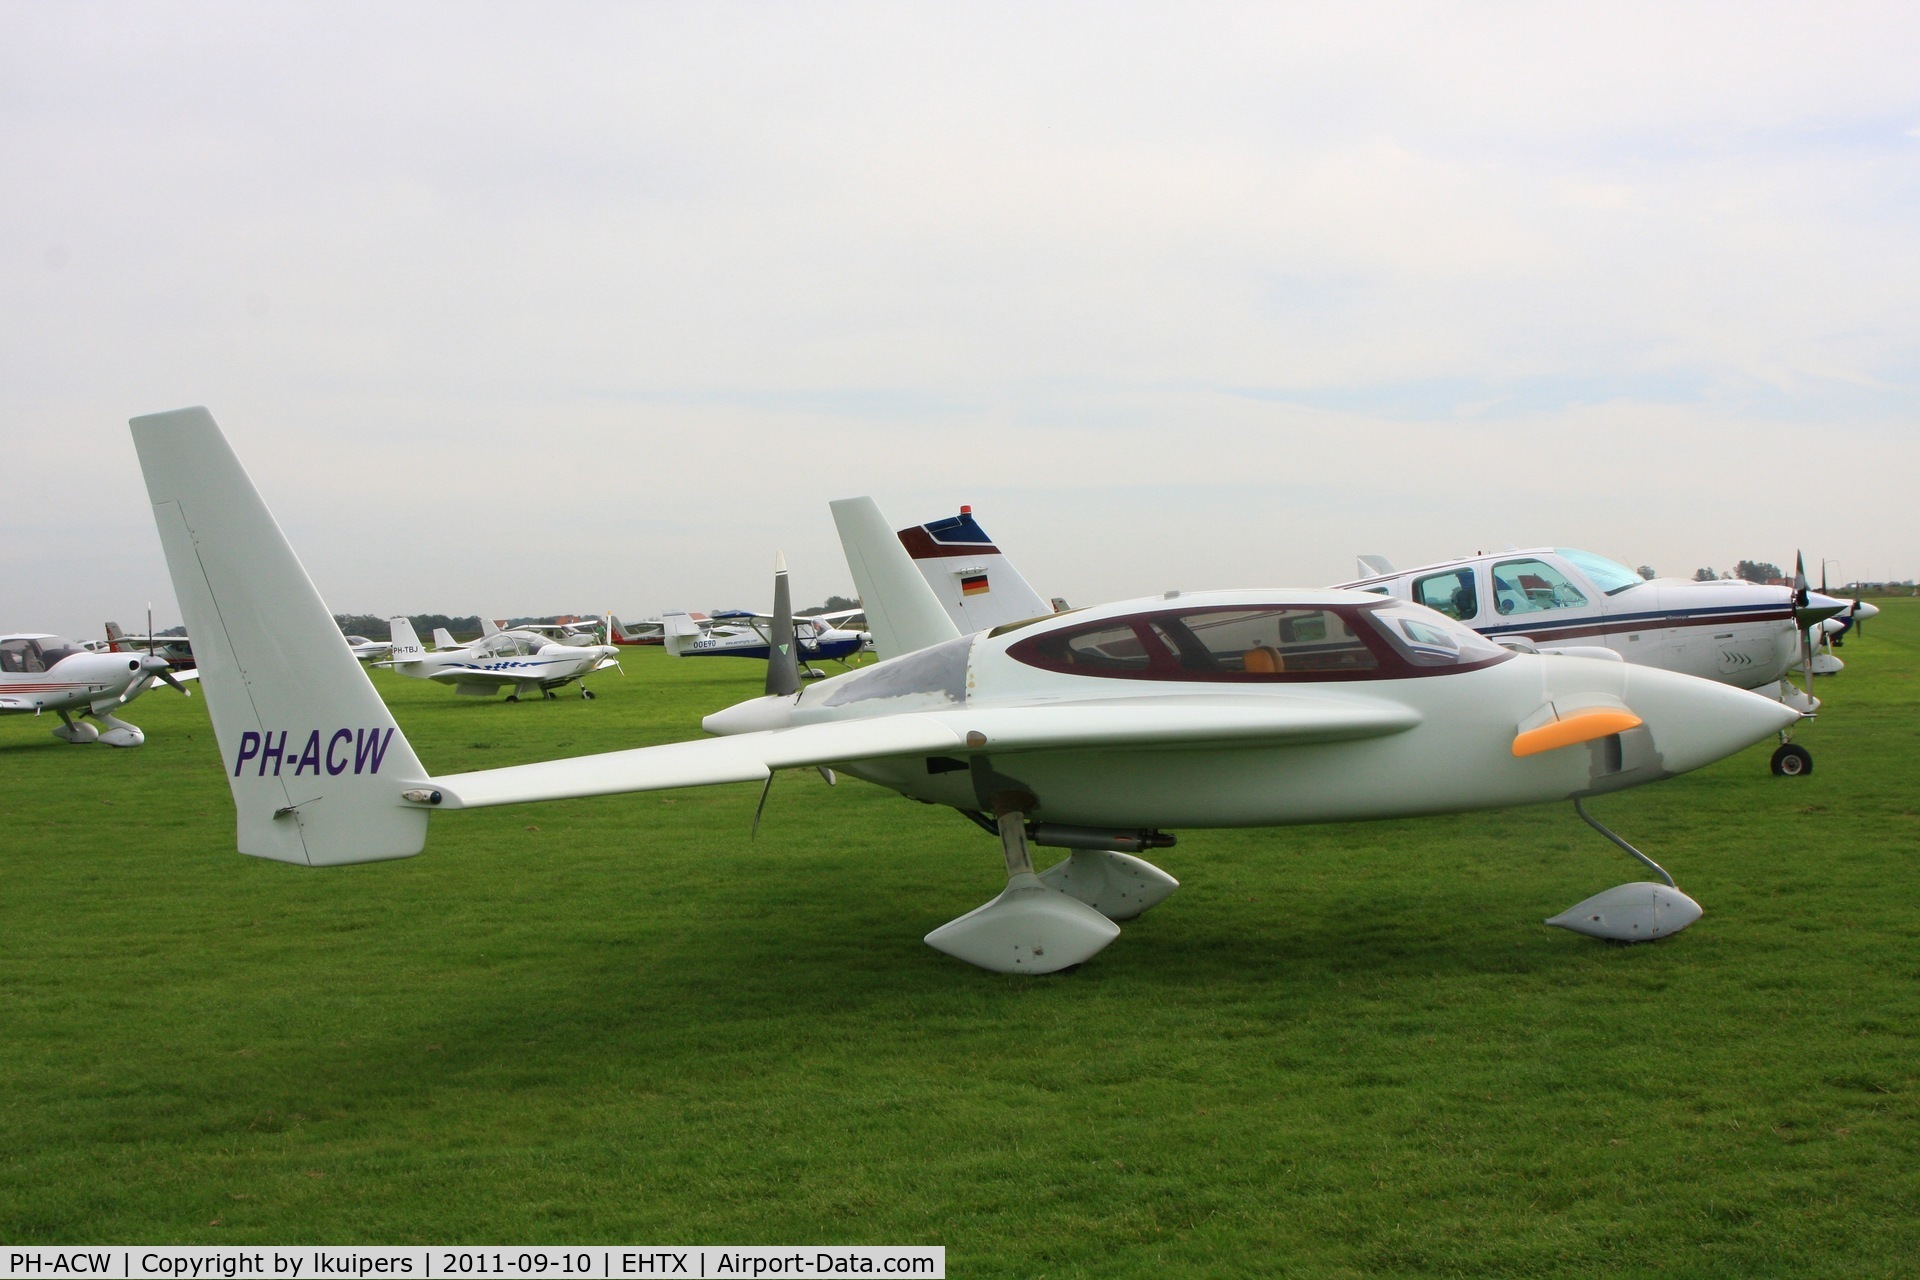 PH-ACW, 2001 Velocity Velocity 173 Elite FG C/N DM0066, At the 3rd Light Aircraft Fly-in on Texel Airport in September 2011